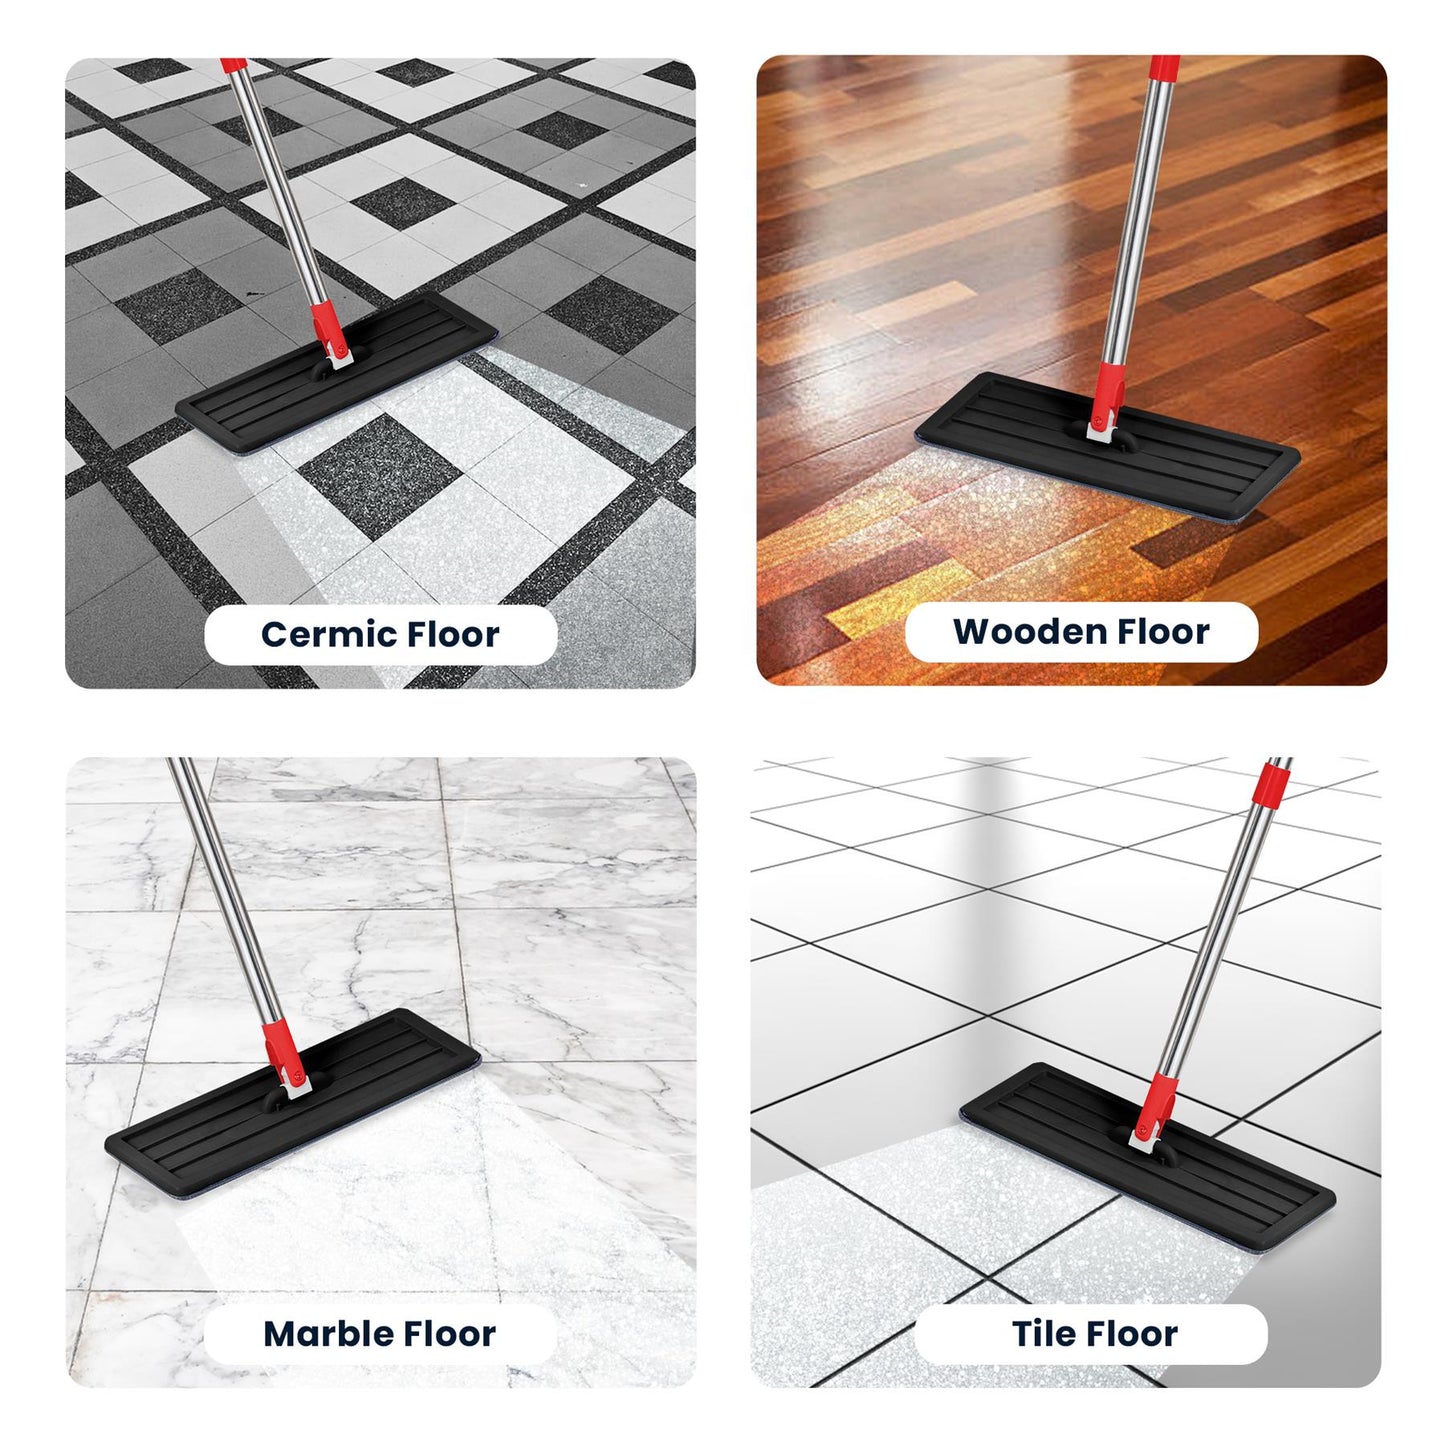 Keep Your Floors Clean with Flat Mop & Bucket 5L